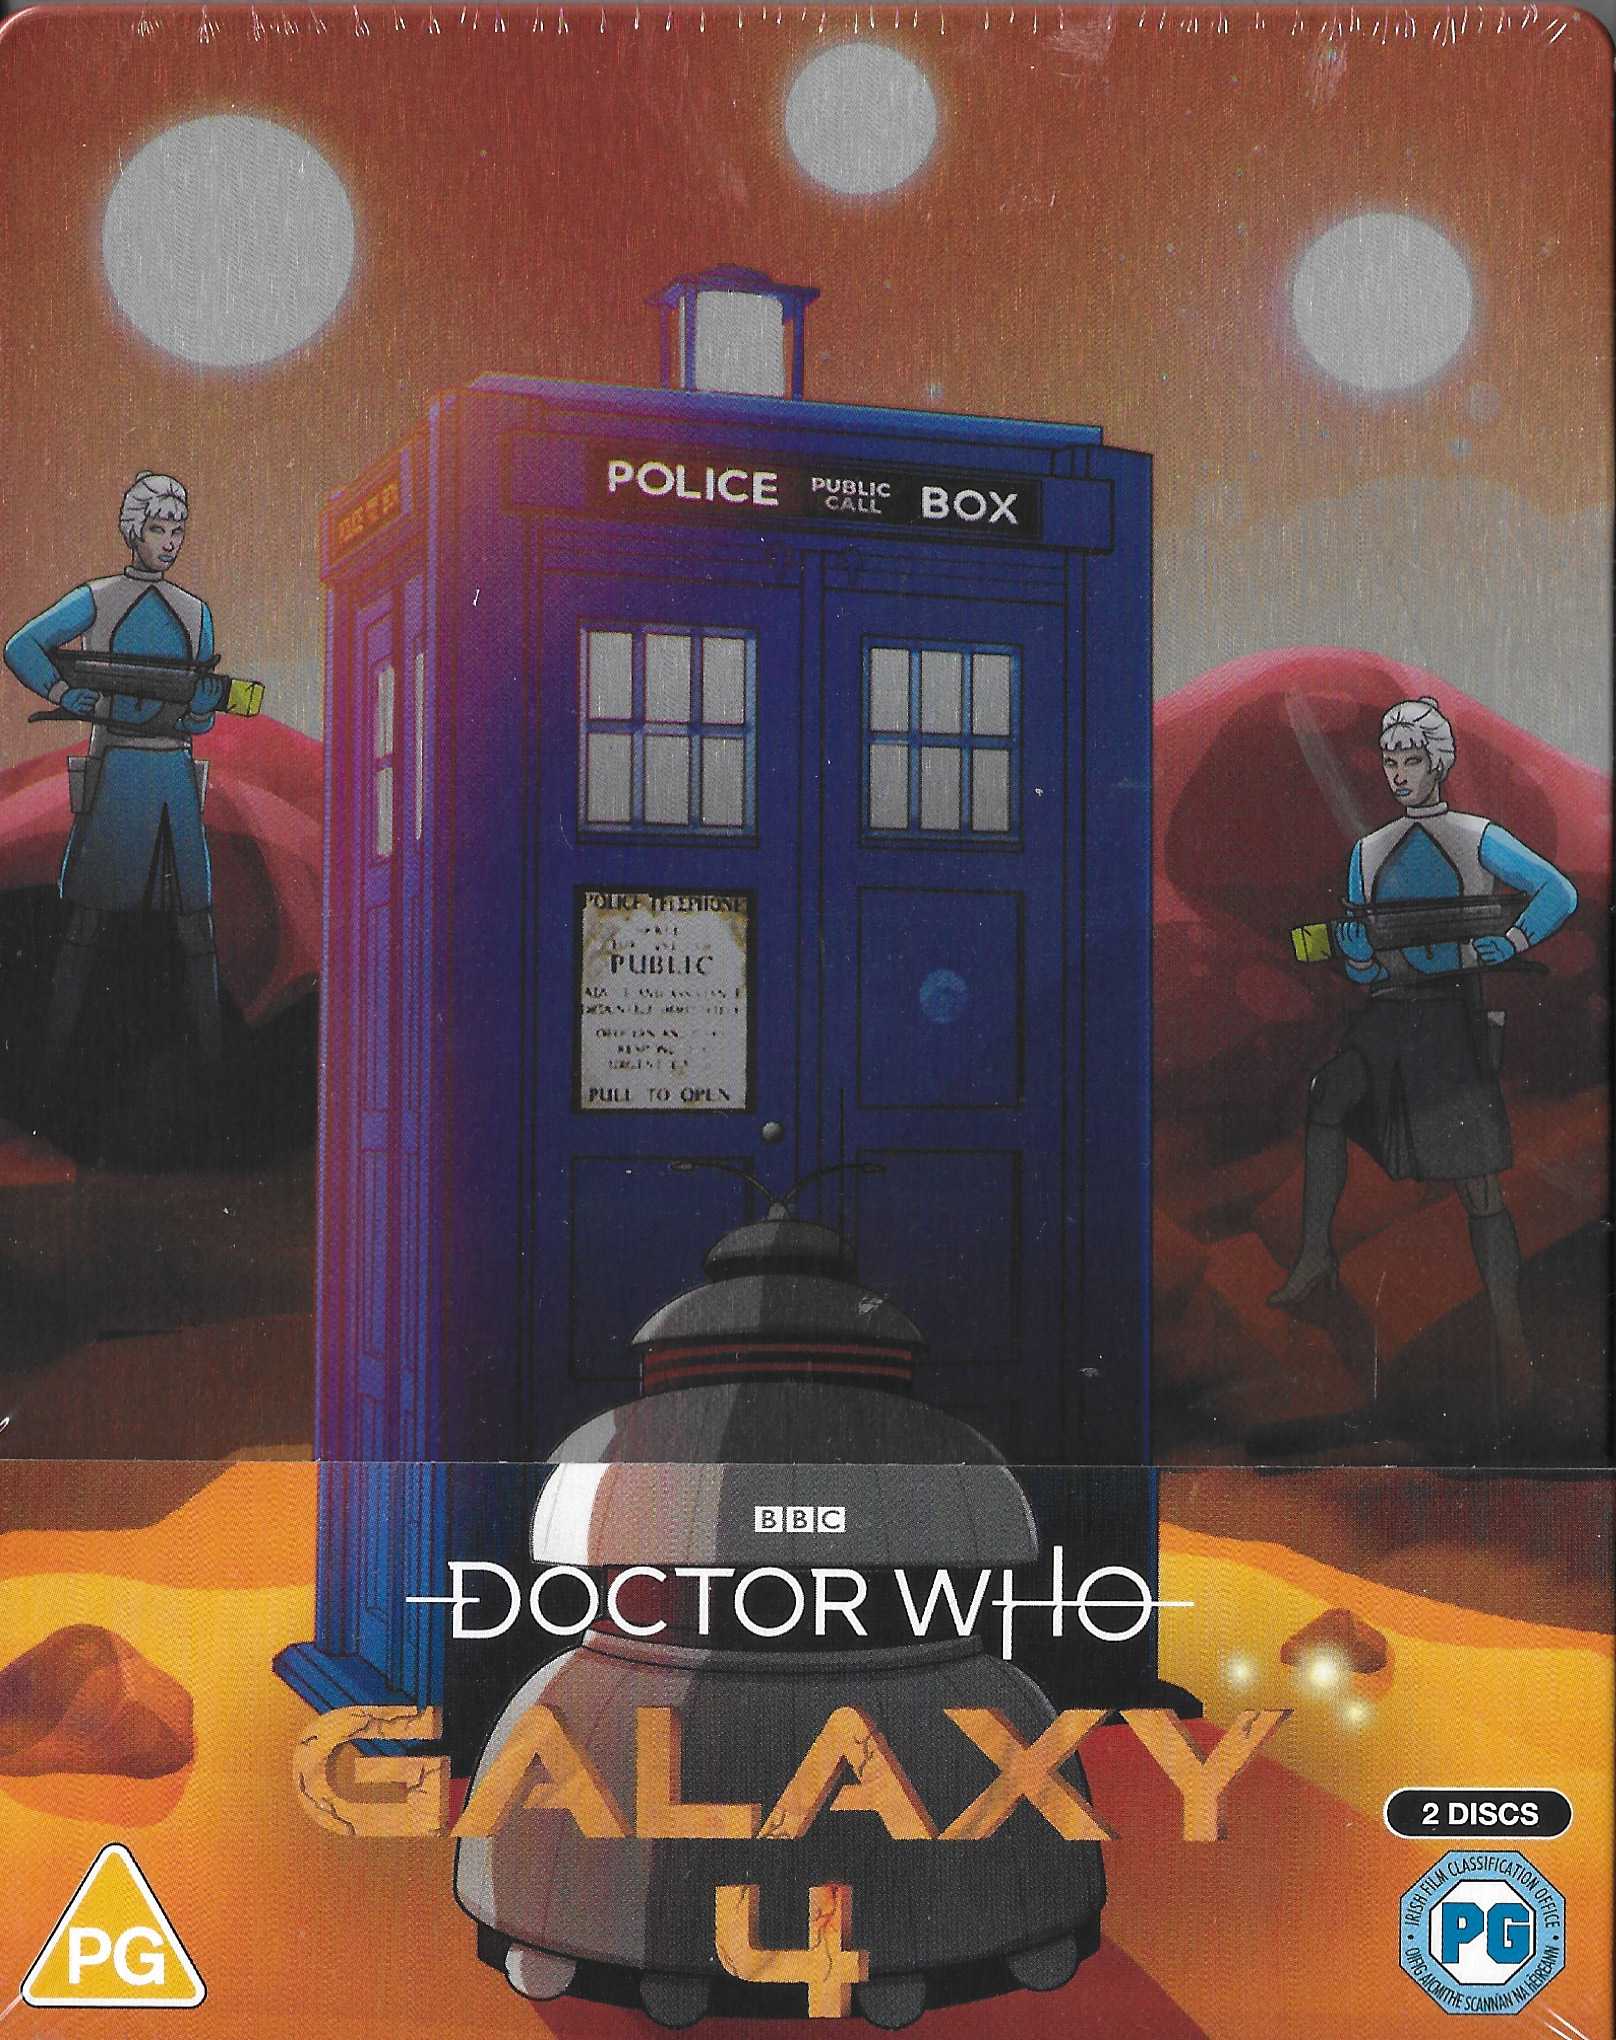 Picture of BBCBD 0524 Doctor Who - Galaxy 4 (Limited Amazon steelbook edition) by artist William Emms from the BBC blu-rays - Records and Tapes library